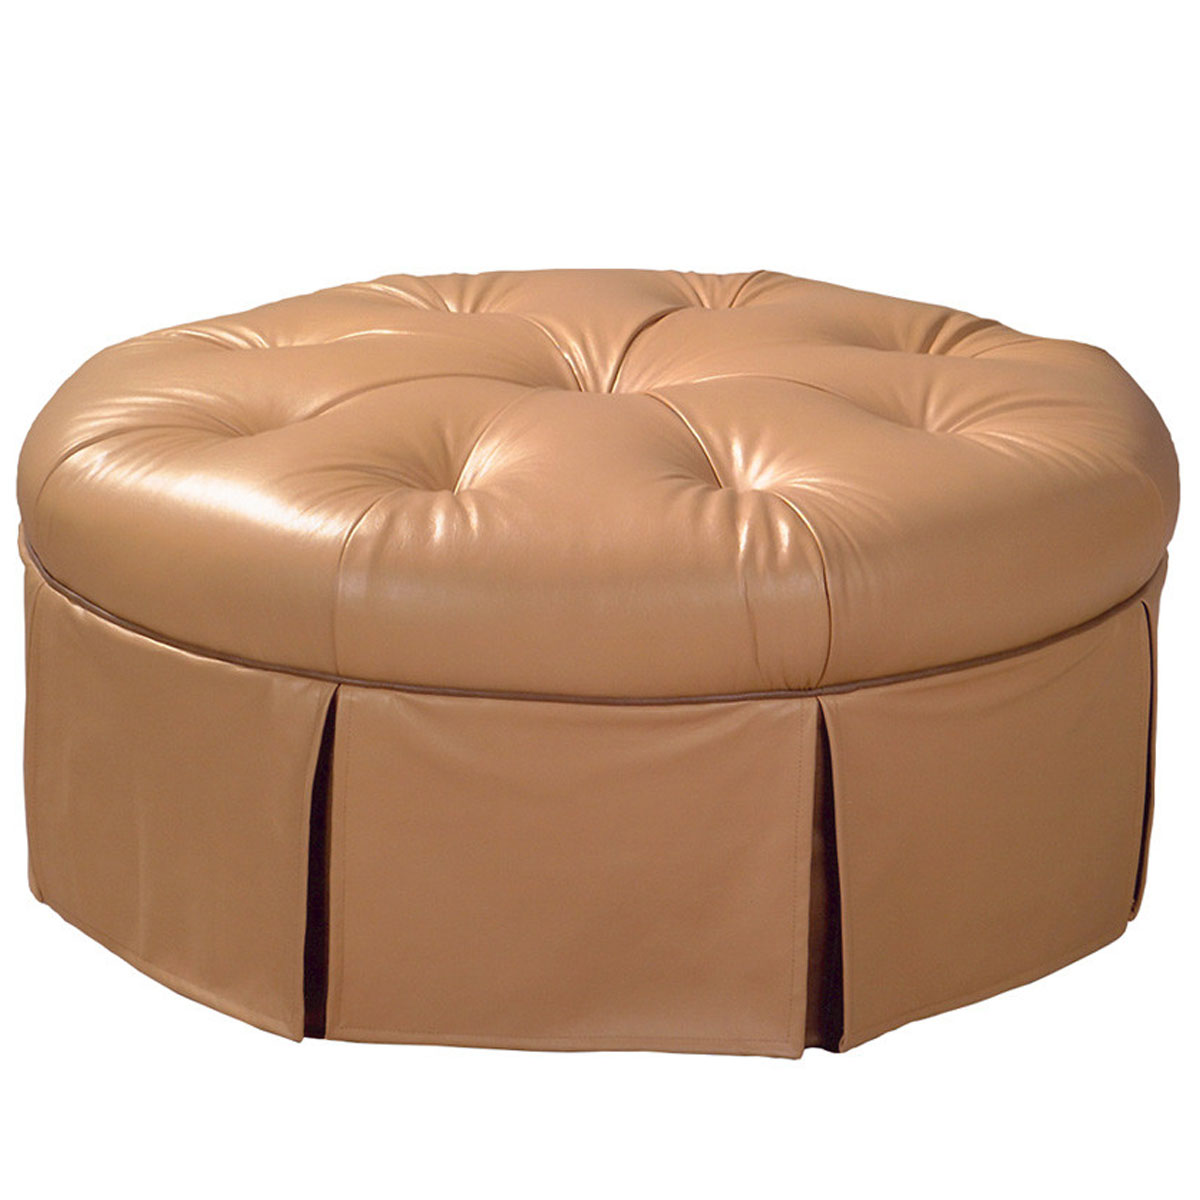 31-40 Felicity 40 inch Round Skirted Ottoman by McKinley Leather